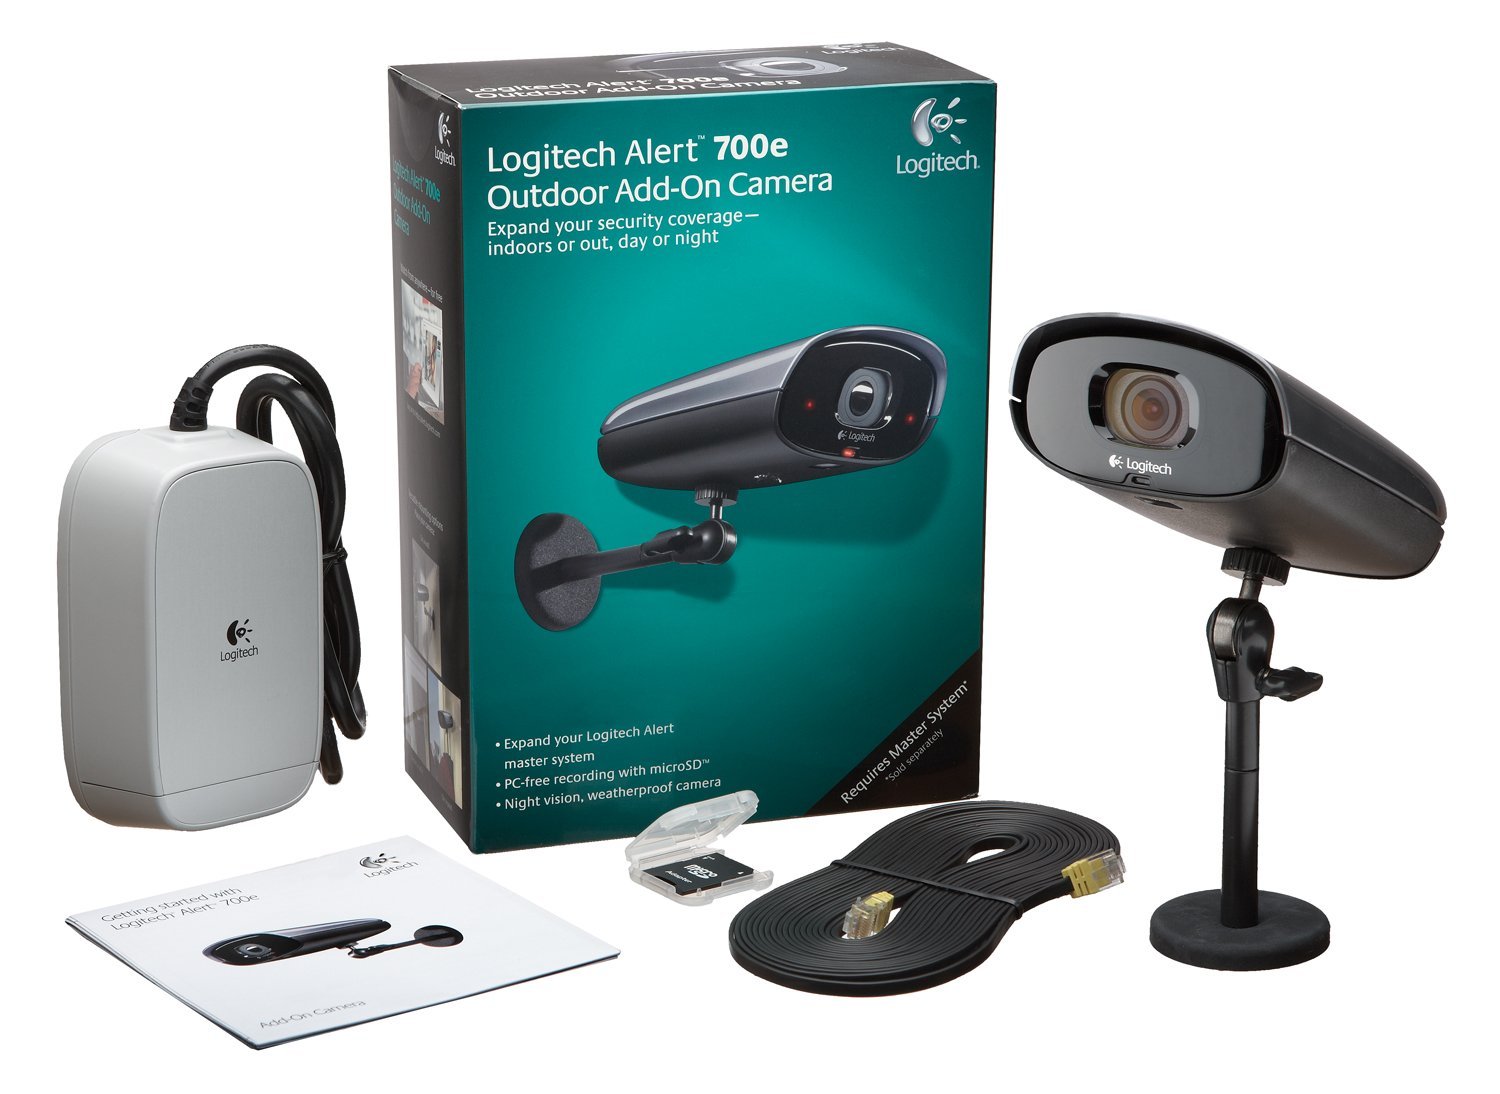 Logitech Alert 700e Outdoor Add-On HD Quality Security Camera with Night Vision (961-000338)